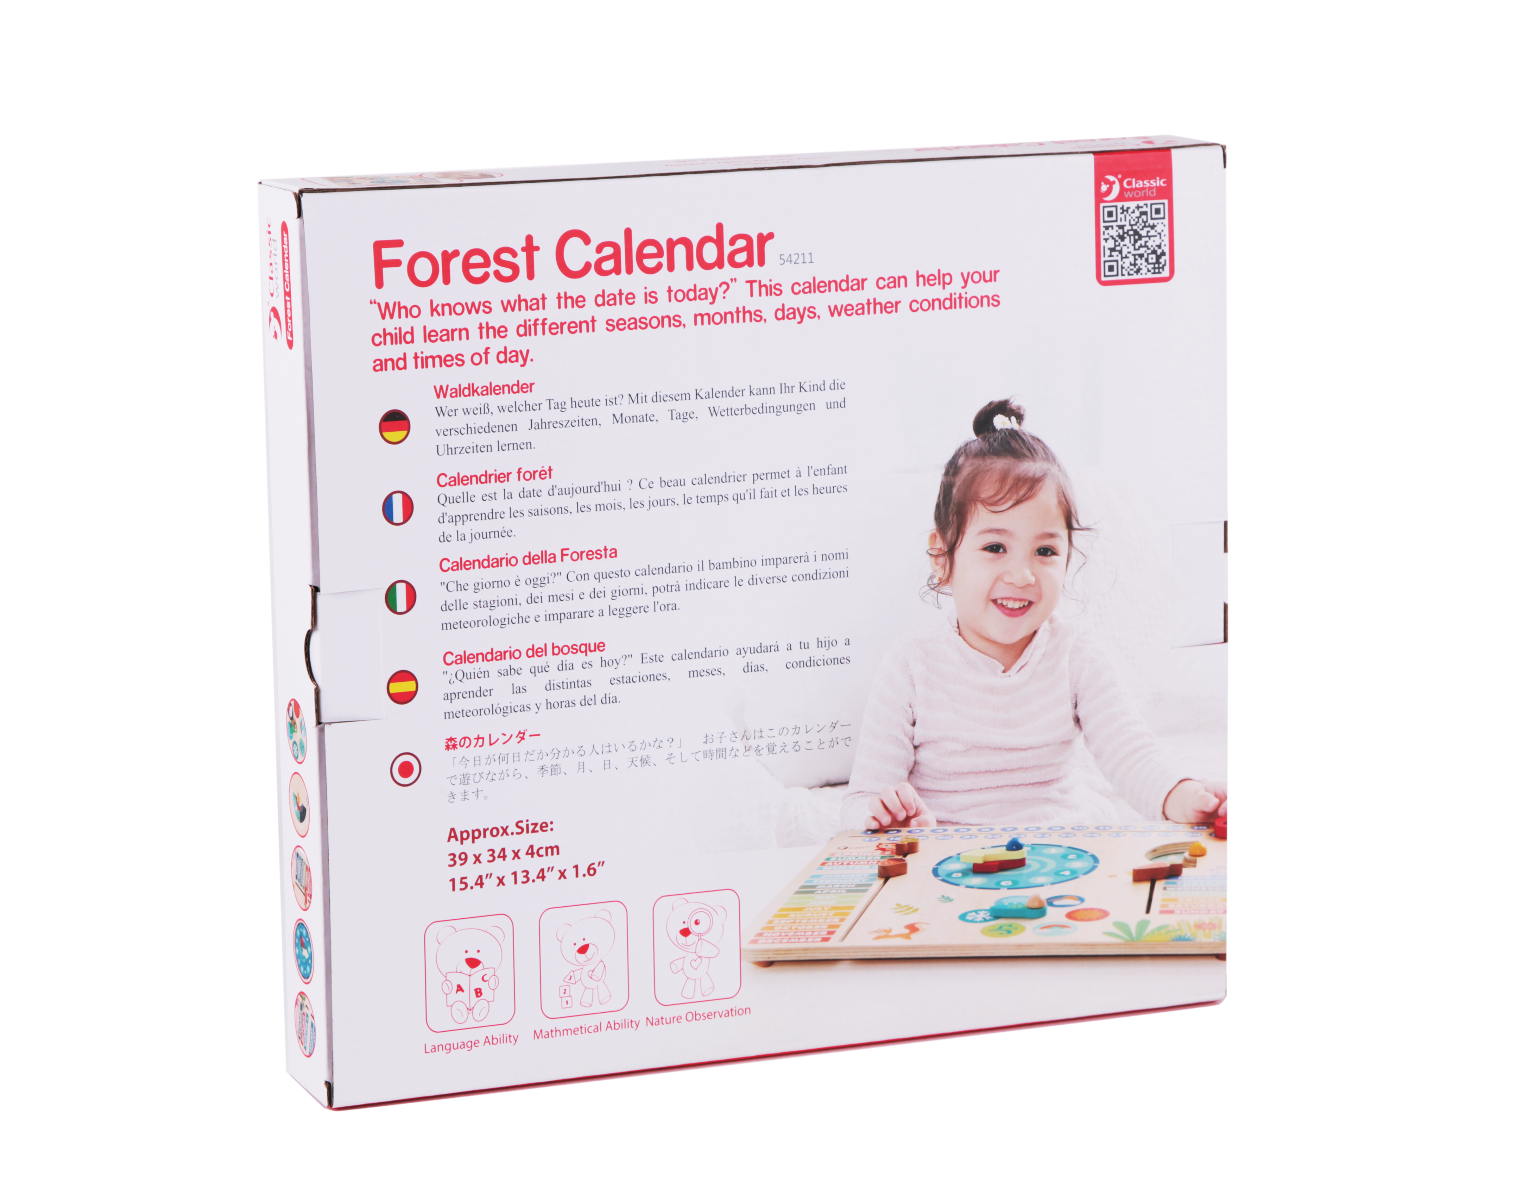 Wooden Forest Calendar by Classic World